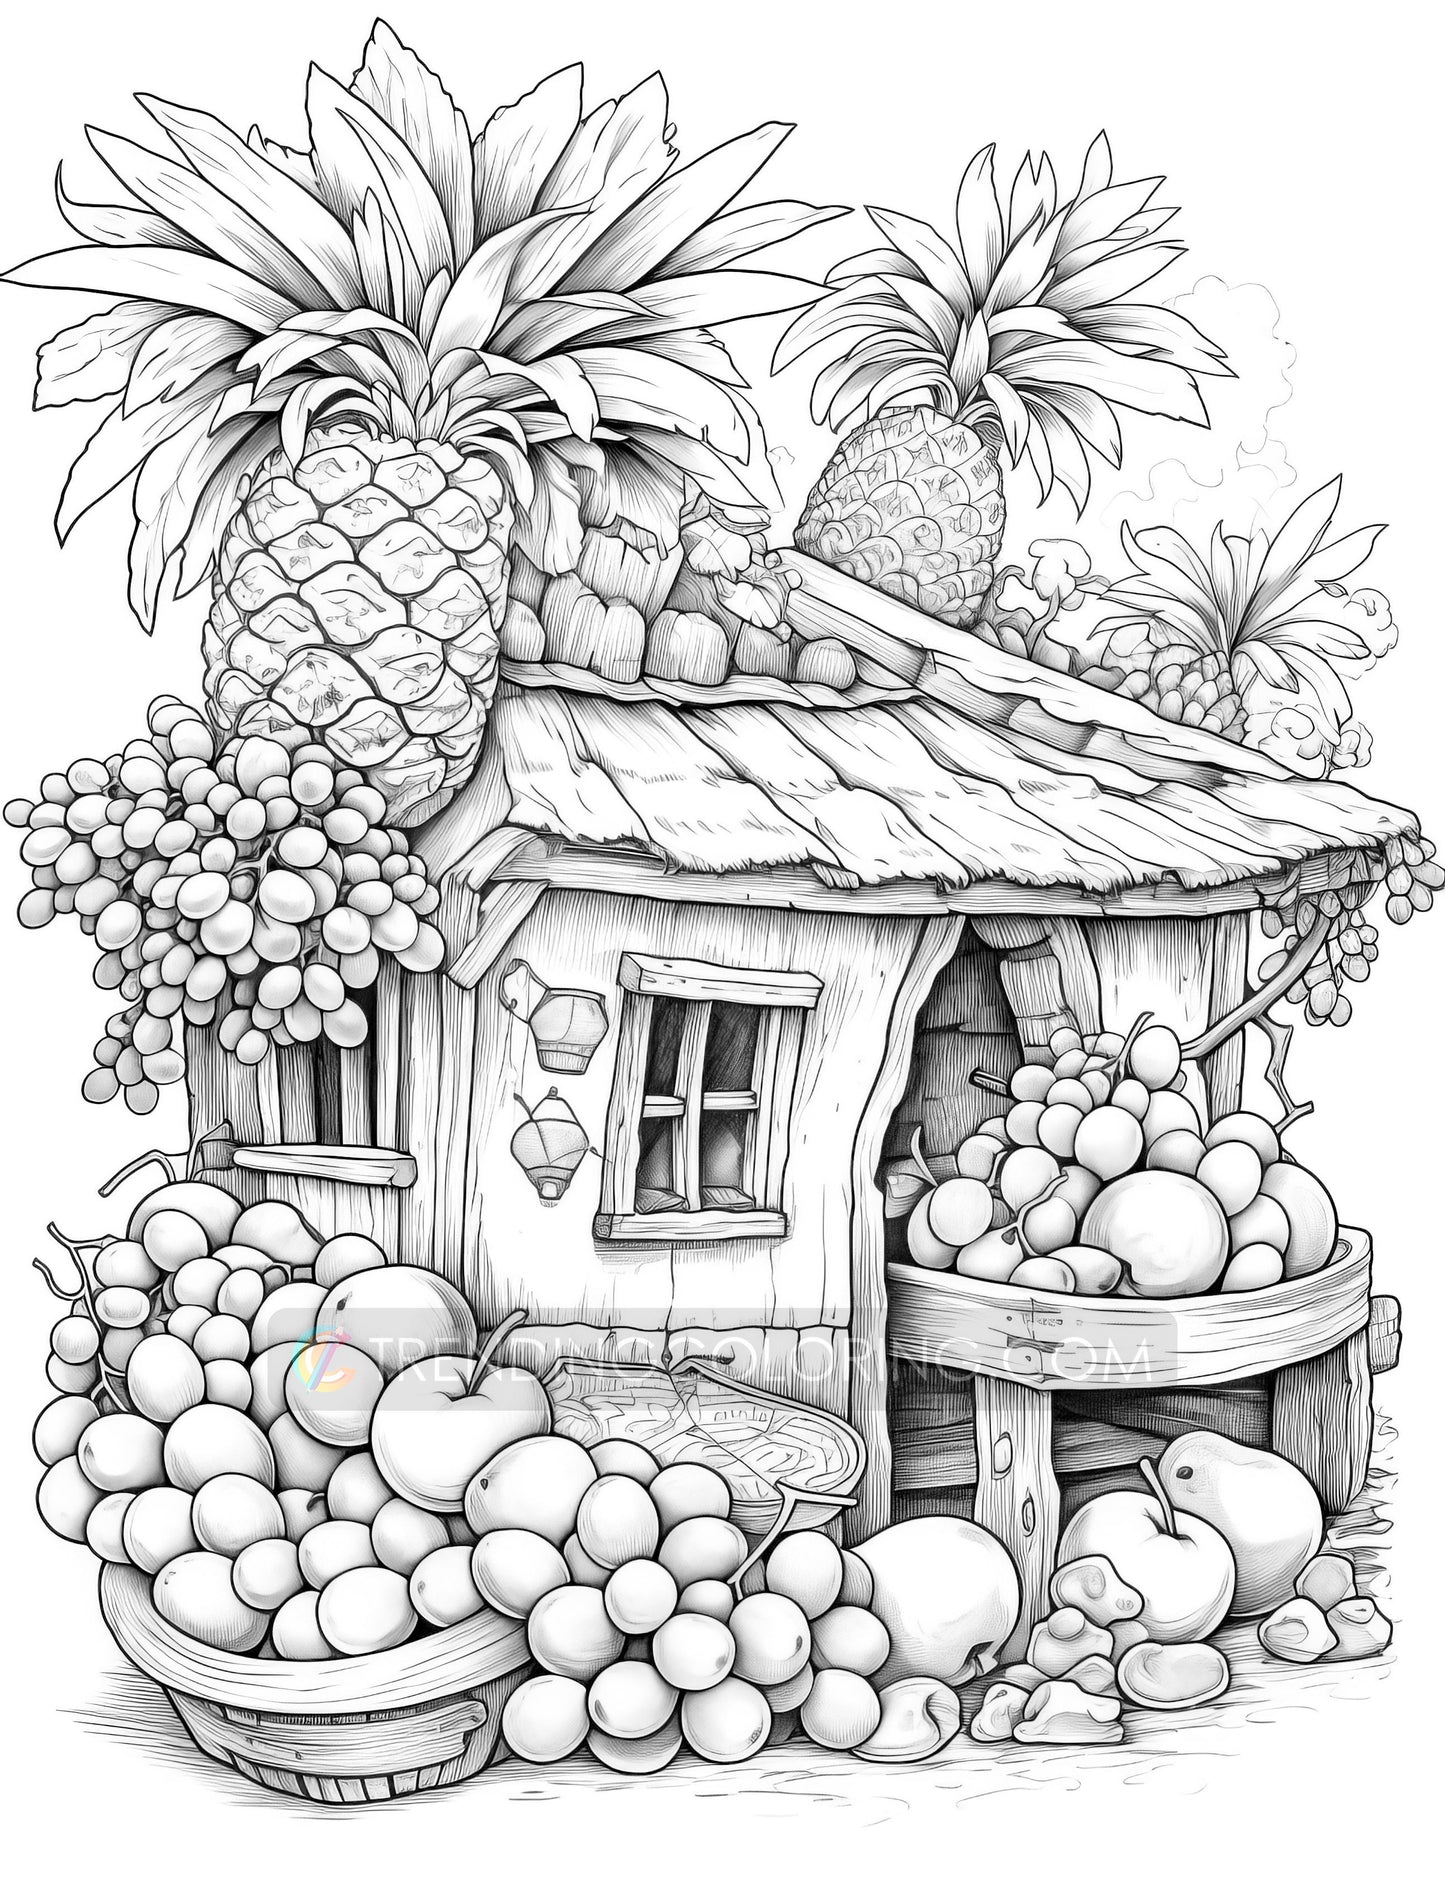 50 Fantasy Fruit House Coloring Pages - Instant Download - Printable PDF